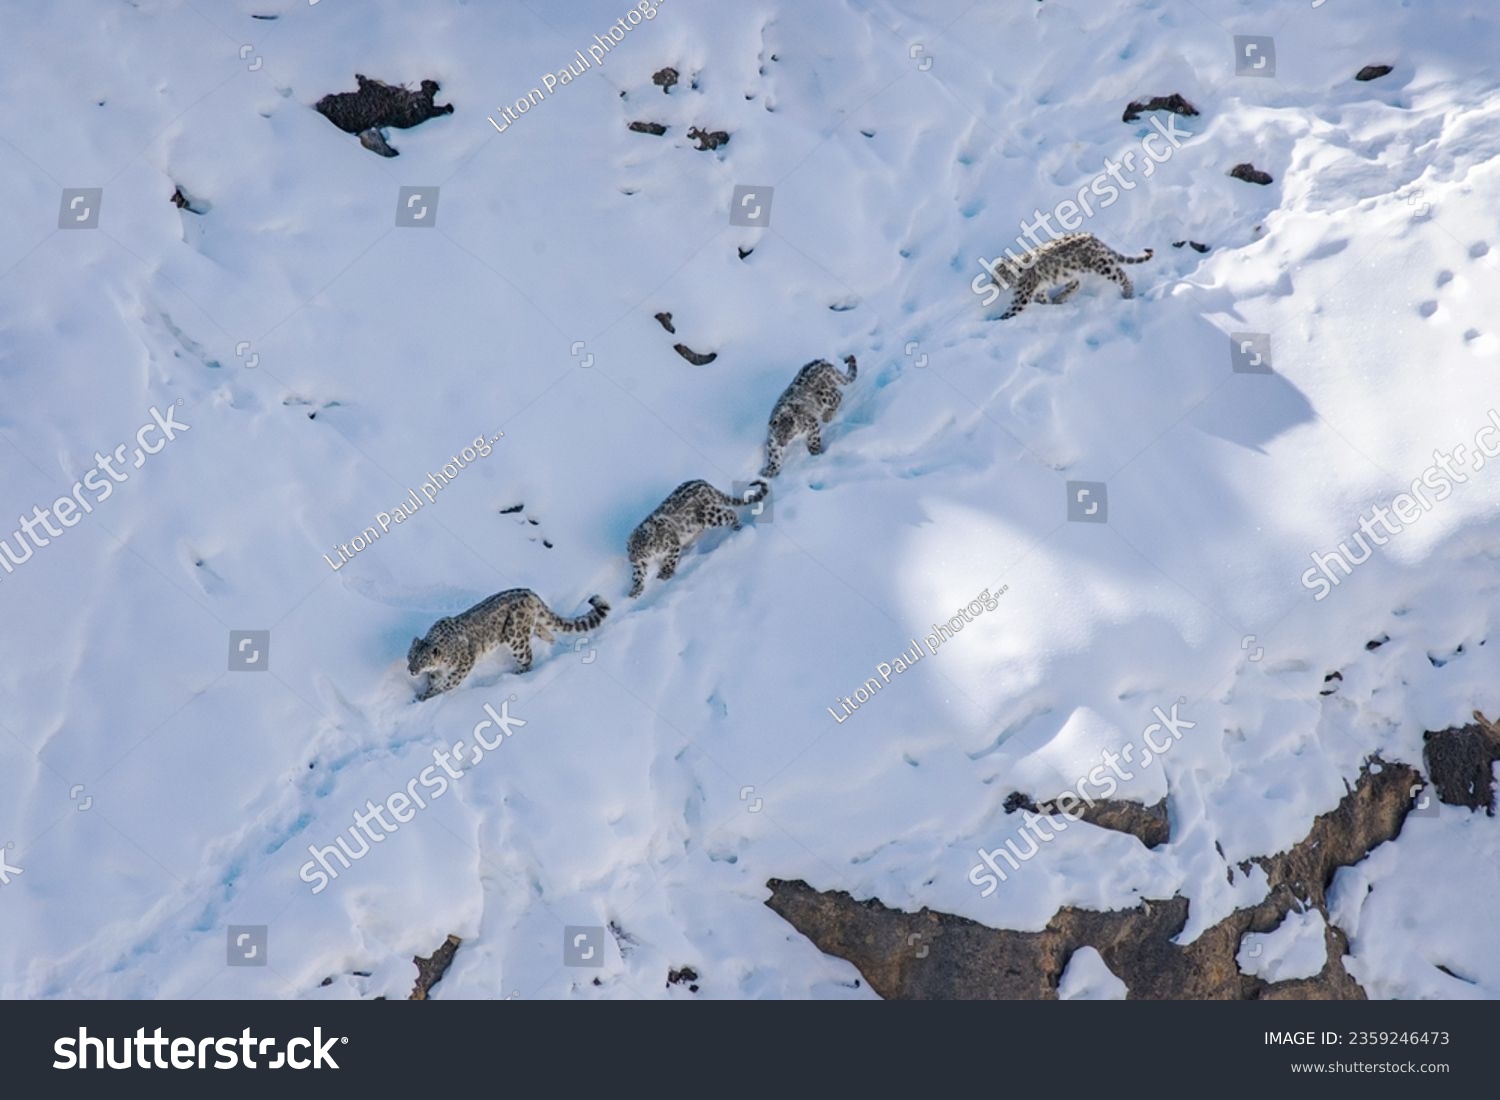 Snow leopard mother with snowleopard cubs, in snow white winter background in Himalayan mountain of Spiti valley snow leopard expedition , himachal pradesh , India. #2359246473